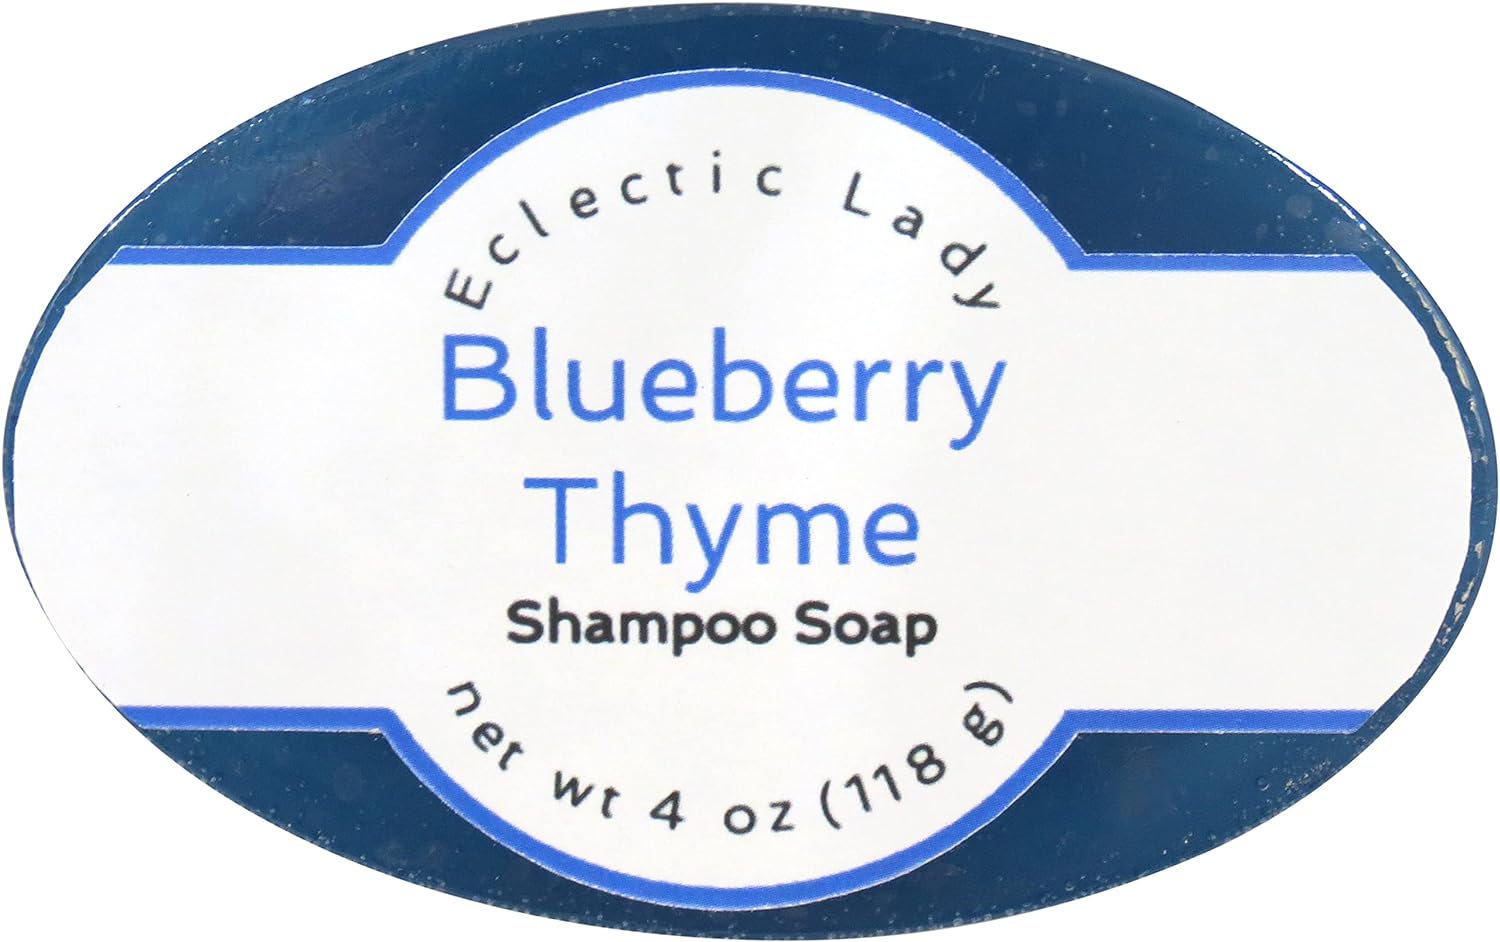 Eclectic Lady Blueberry Thyme Shampoo Soap Bar with Pure Argan Oil, Silk Protein, Honey Protein and Extracts of Calendula ower, Aloe, Carrageenan, Sunower - 4  Bar